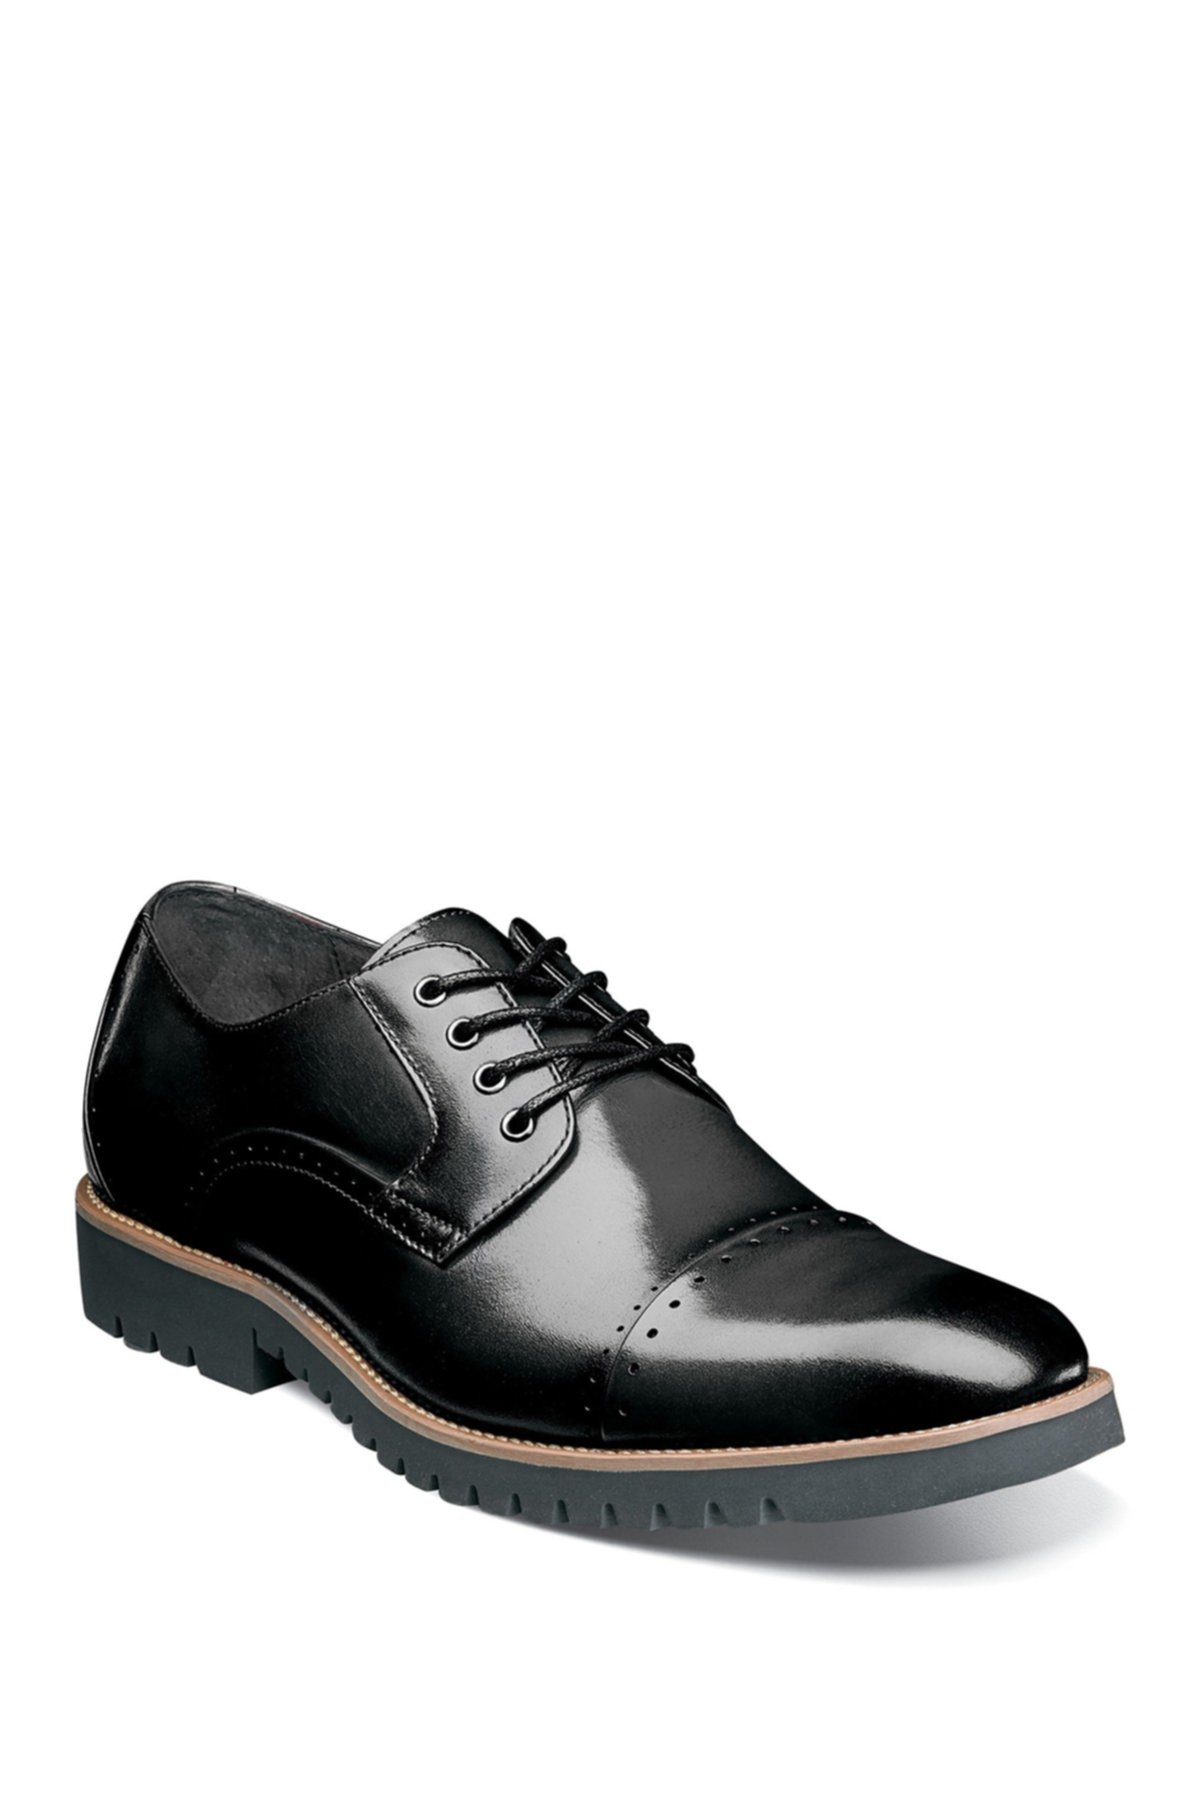 Кепка Barcliff Toe Oxford Stacy Adams